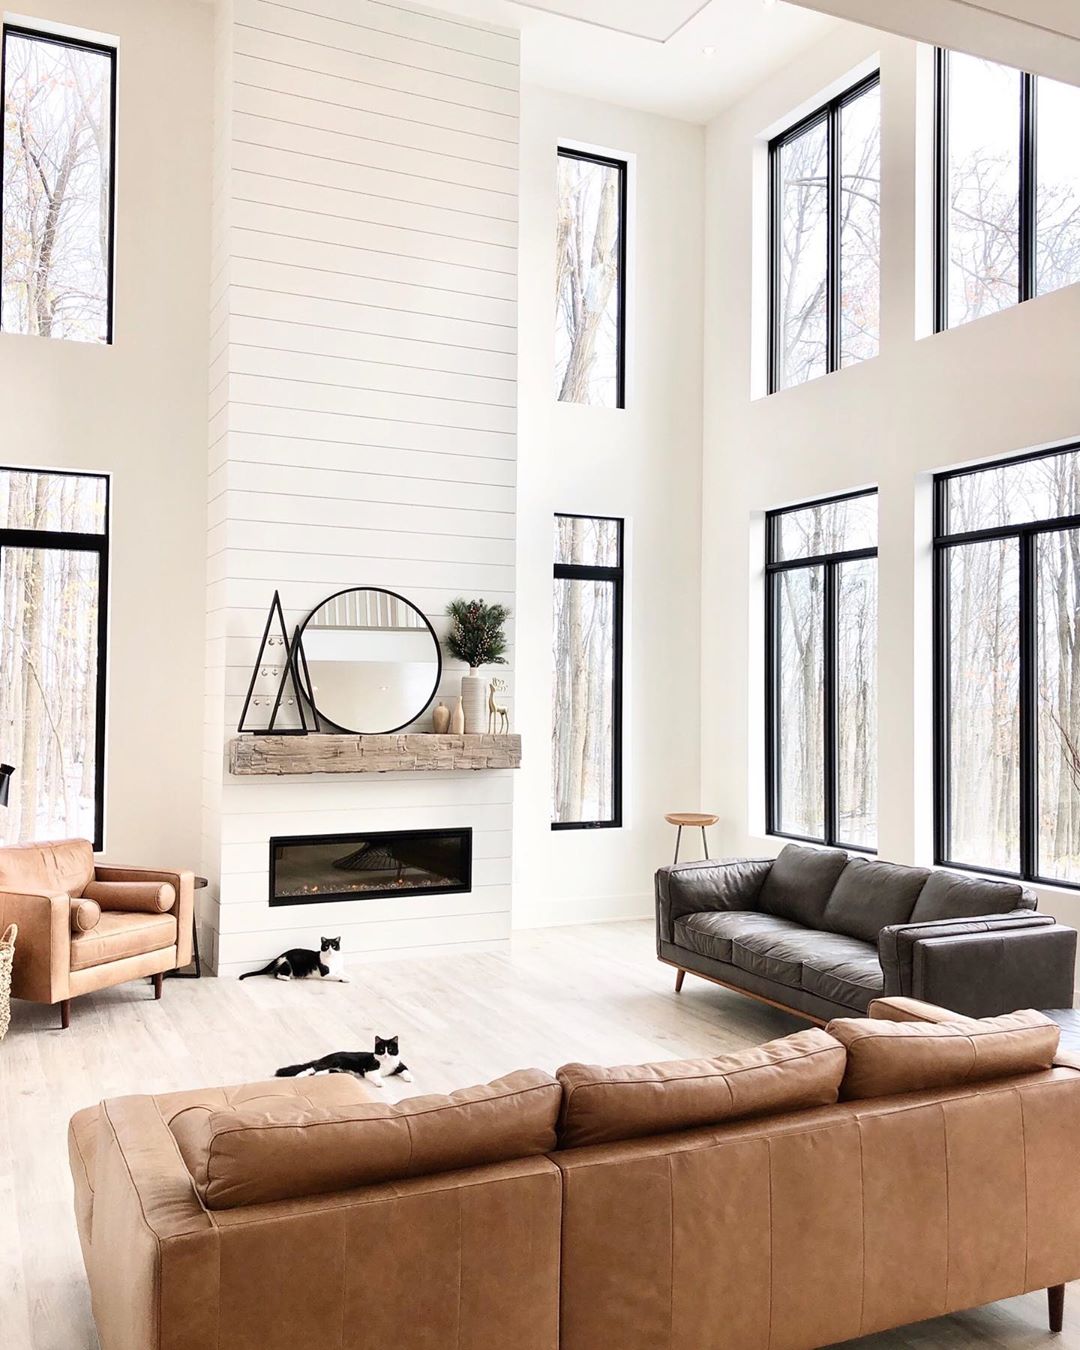 All white living room with big windows and brown couches. Photo by Instagram user @ahousewebuilt